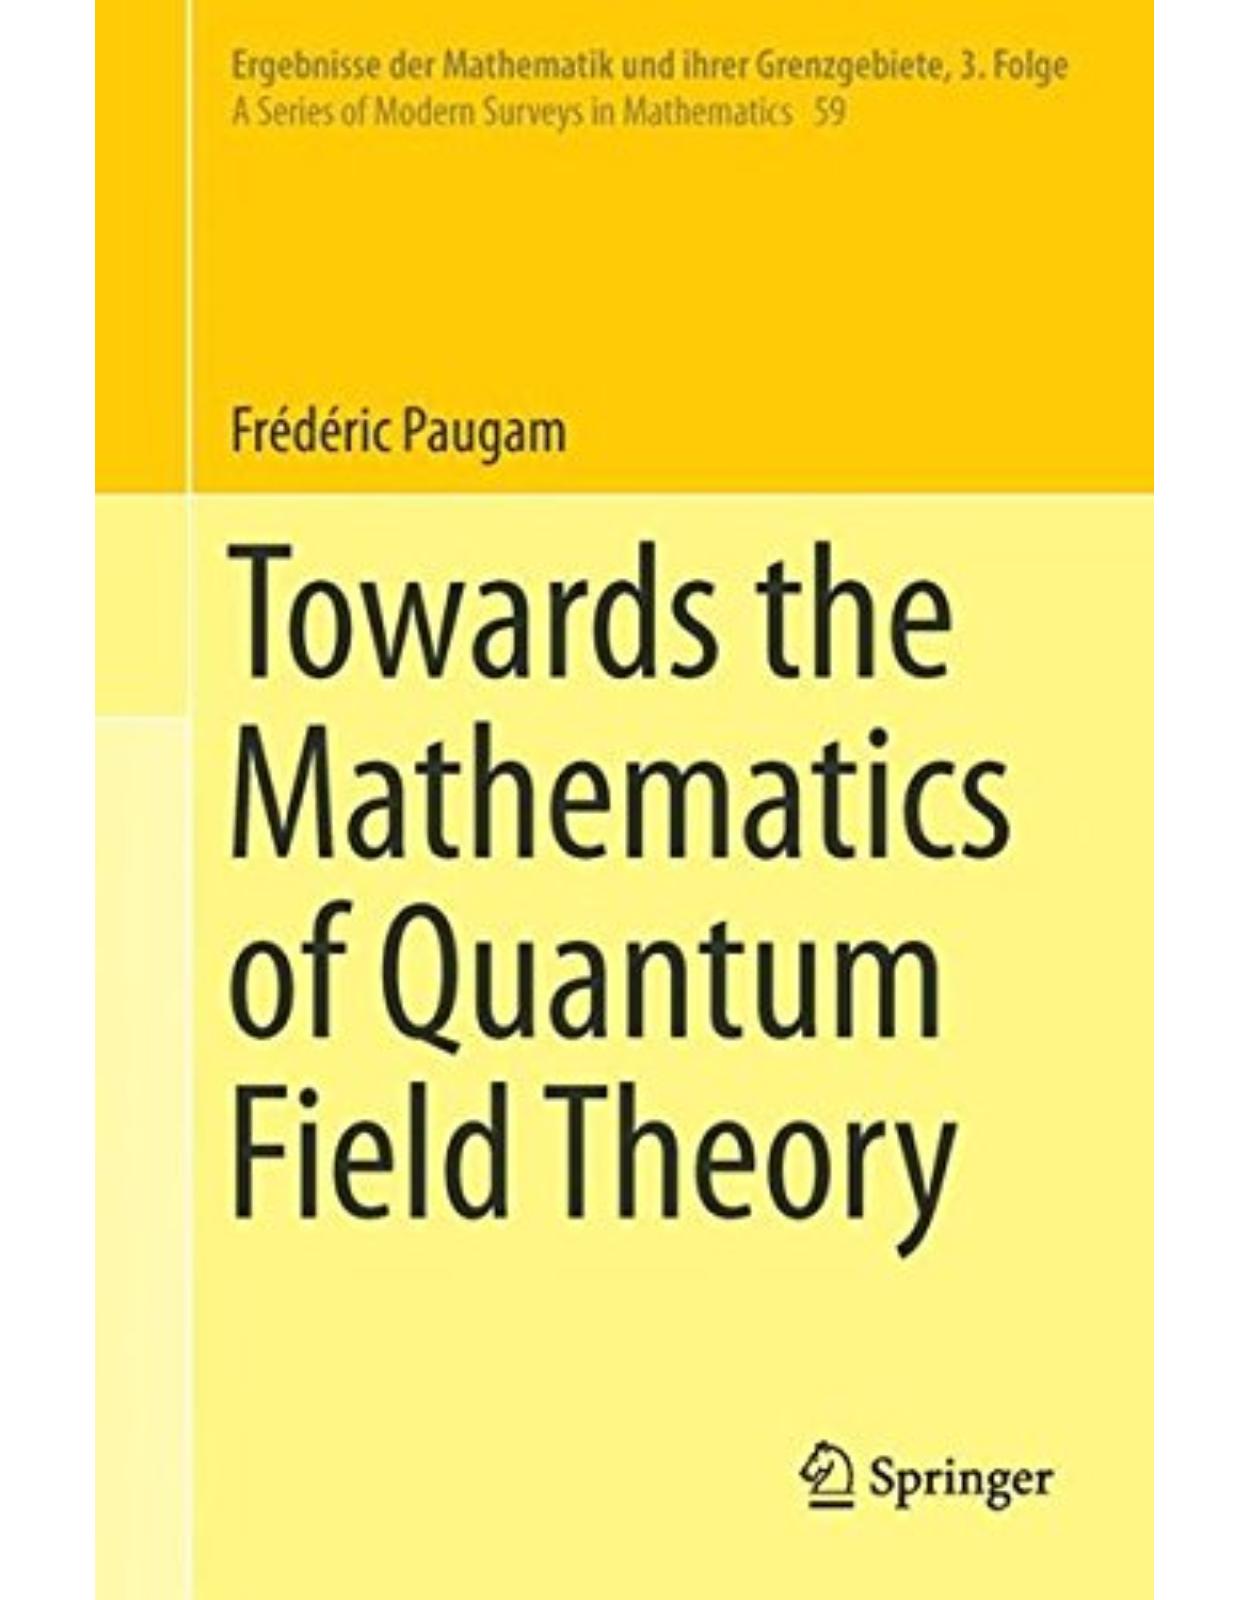 Towards the Mathematics of Quantum Field Theory